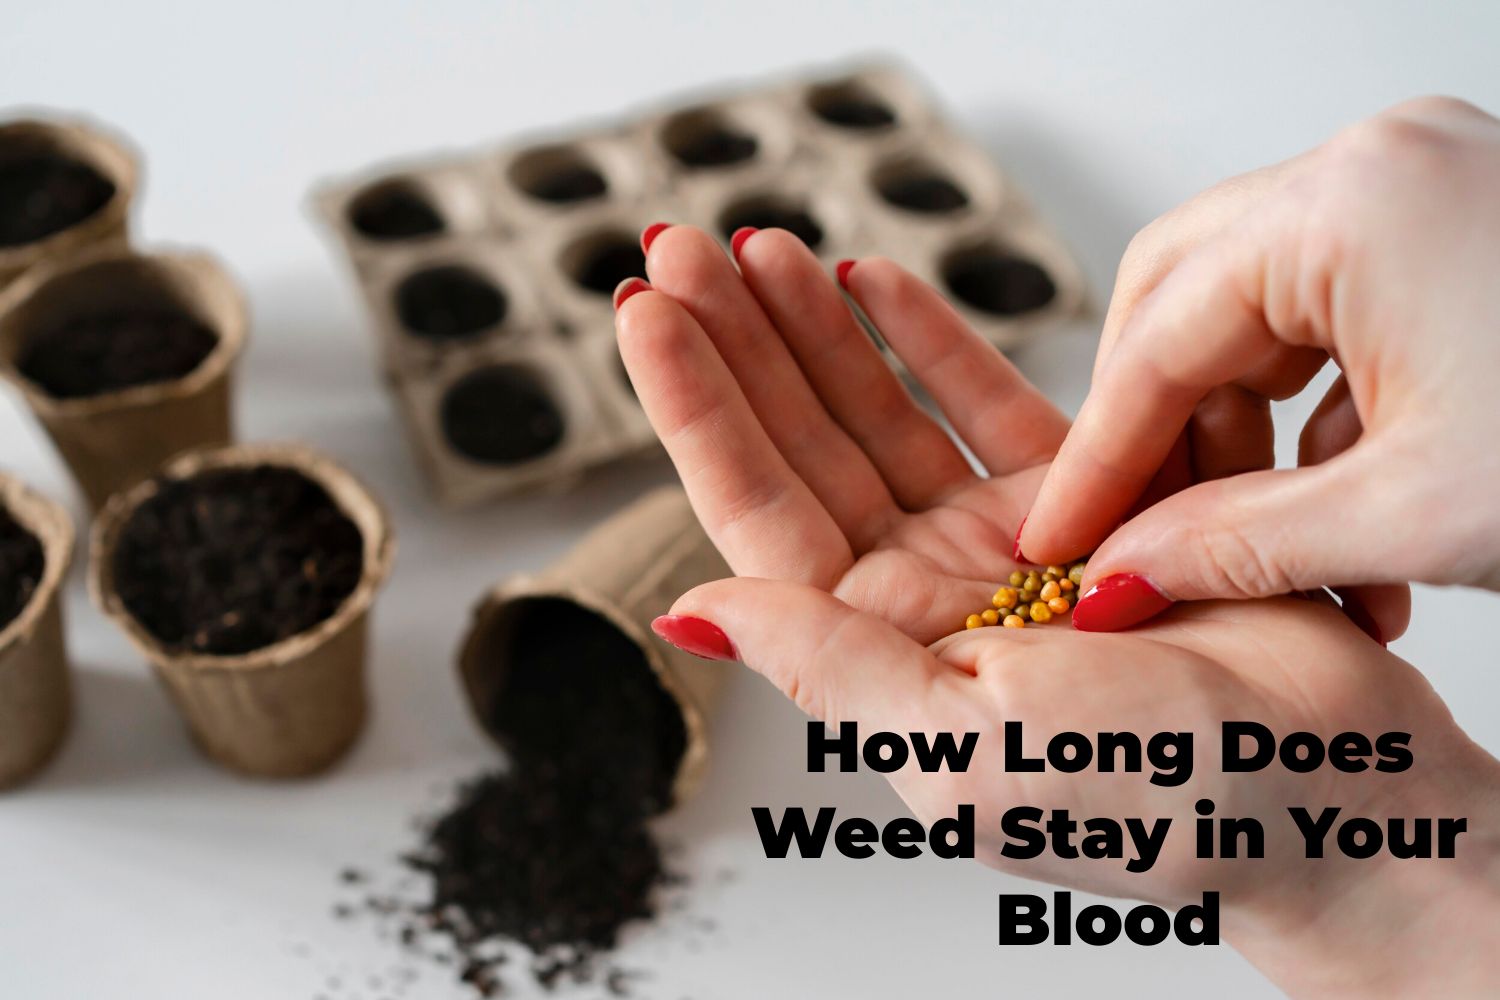 How Long Does Weed Stay in Your Blood